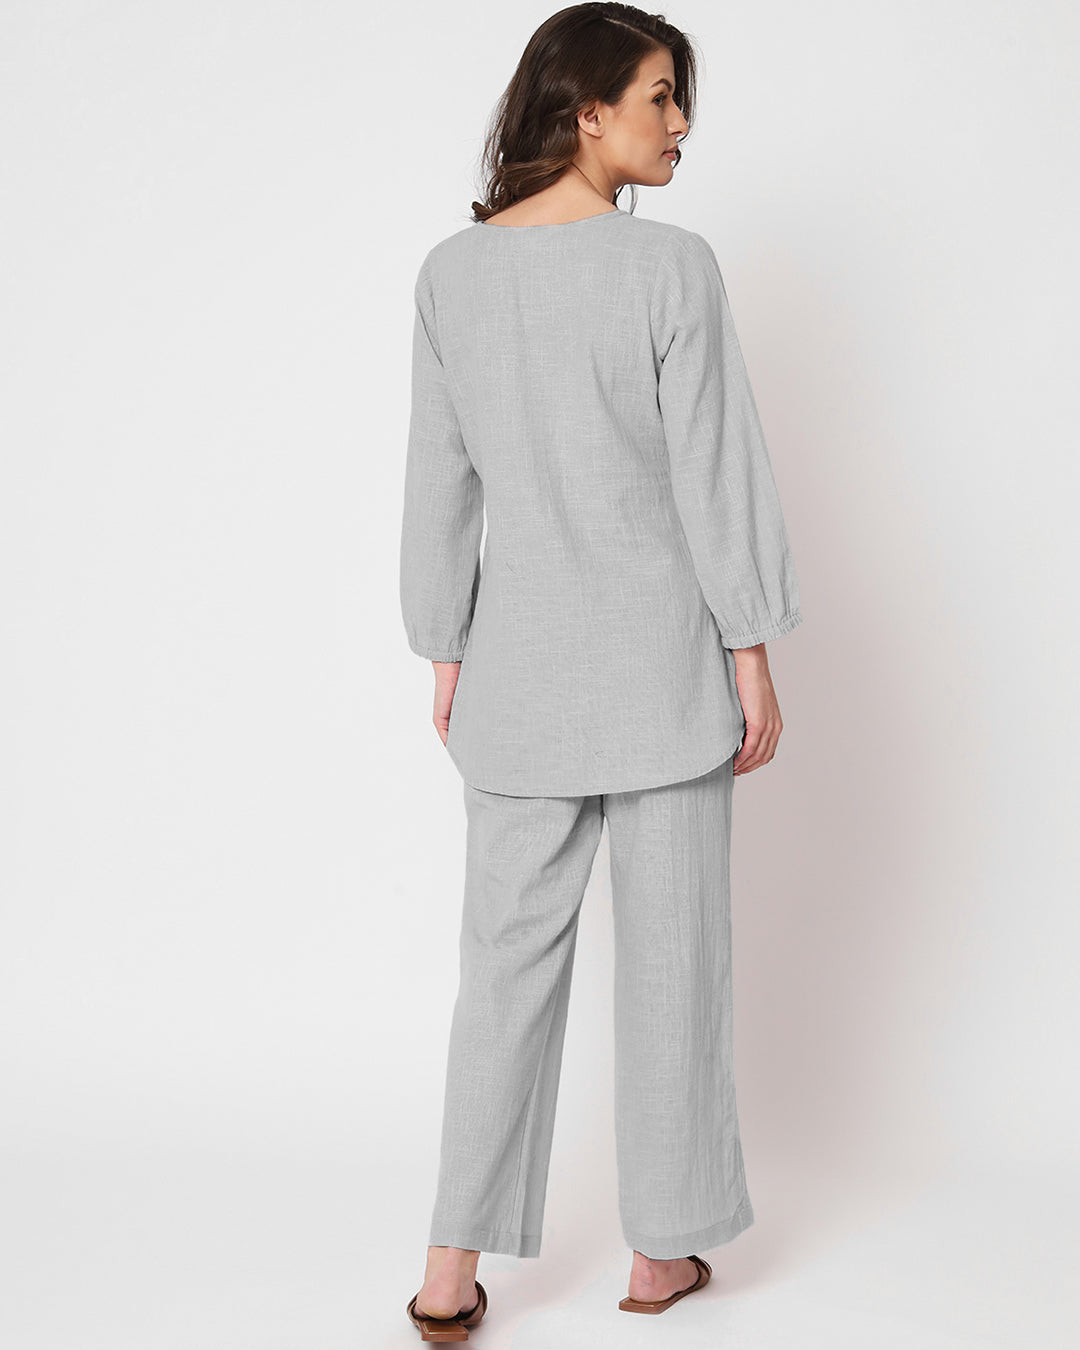 Iced Grey Bishop Sleeves Solid Top (Without Bottoms)